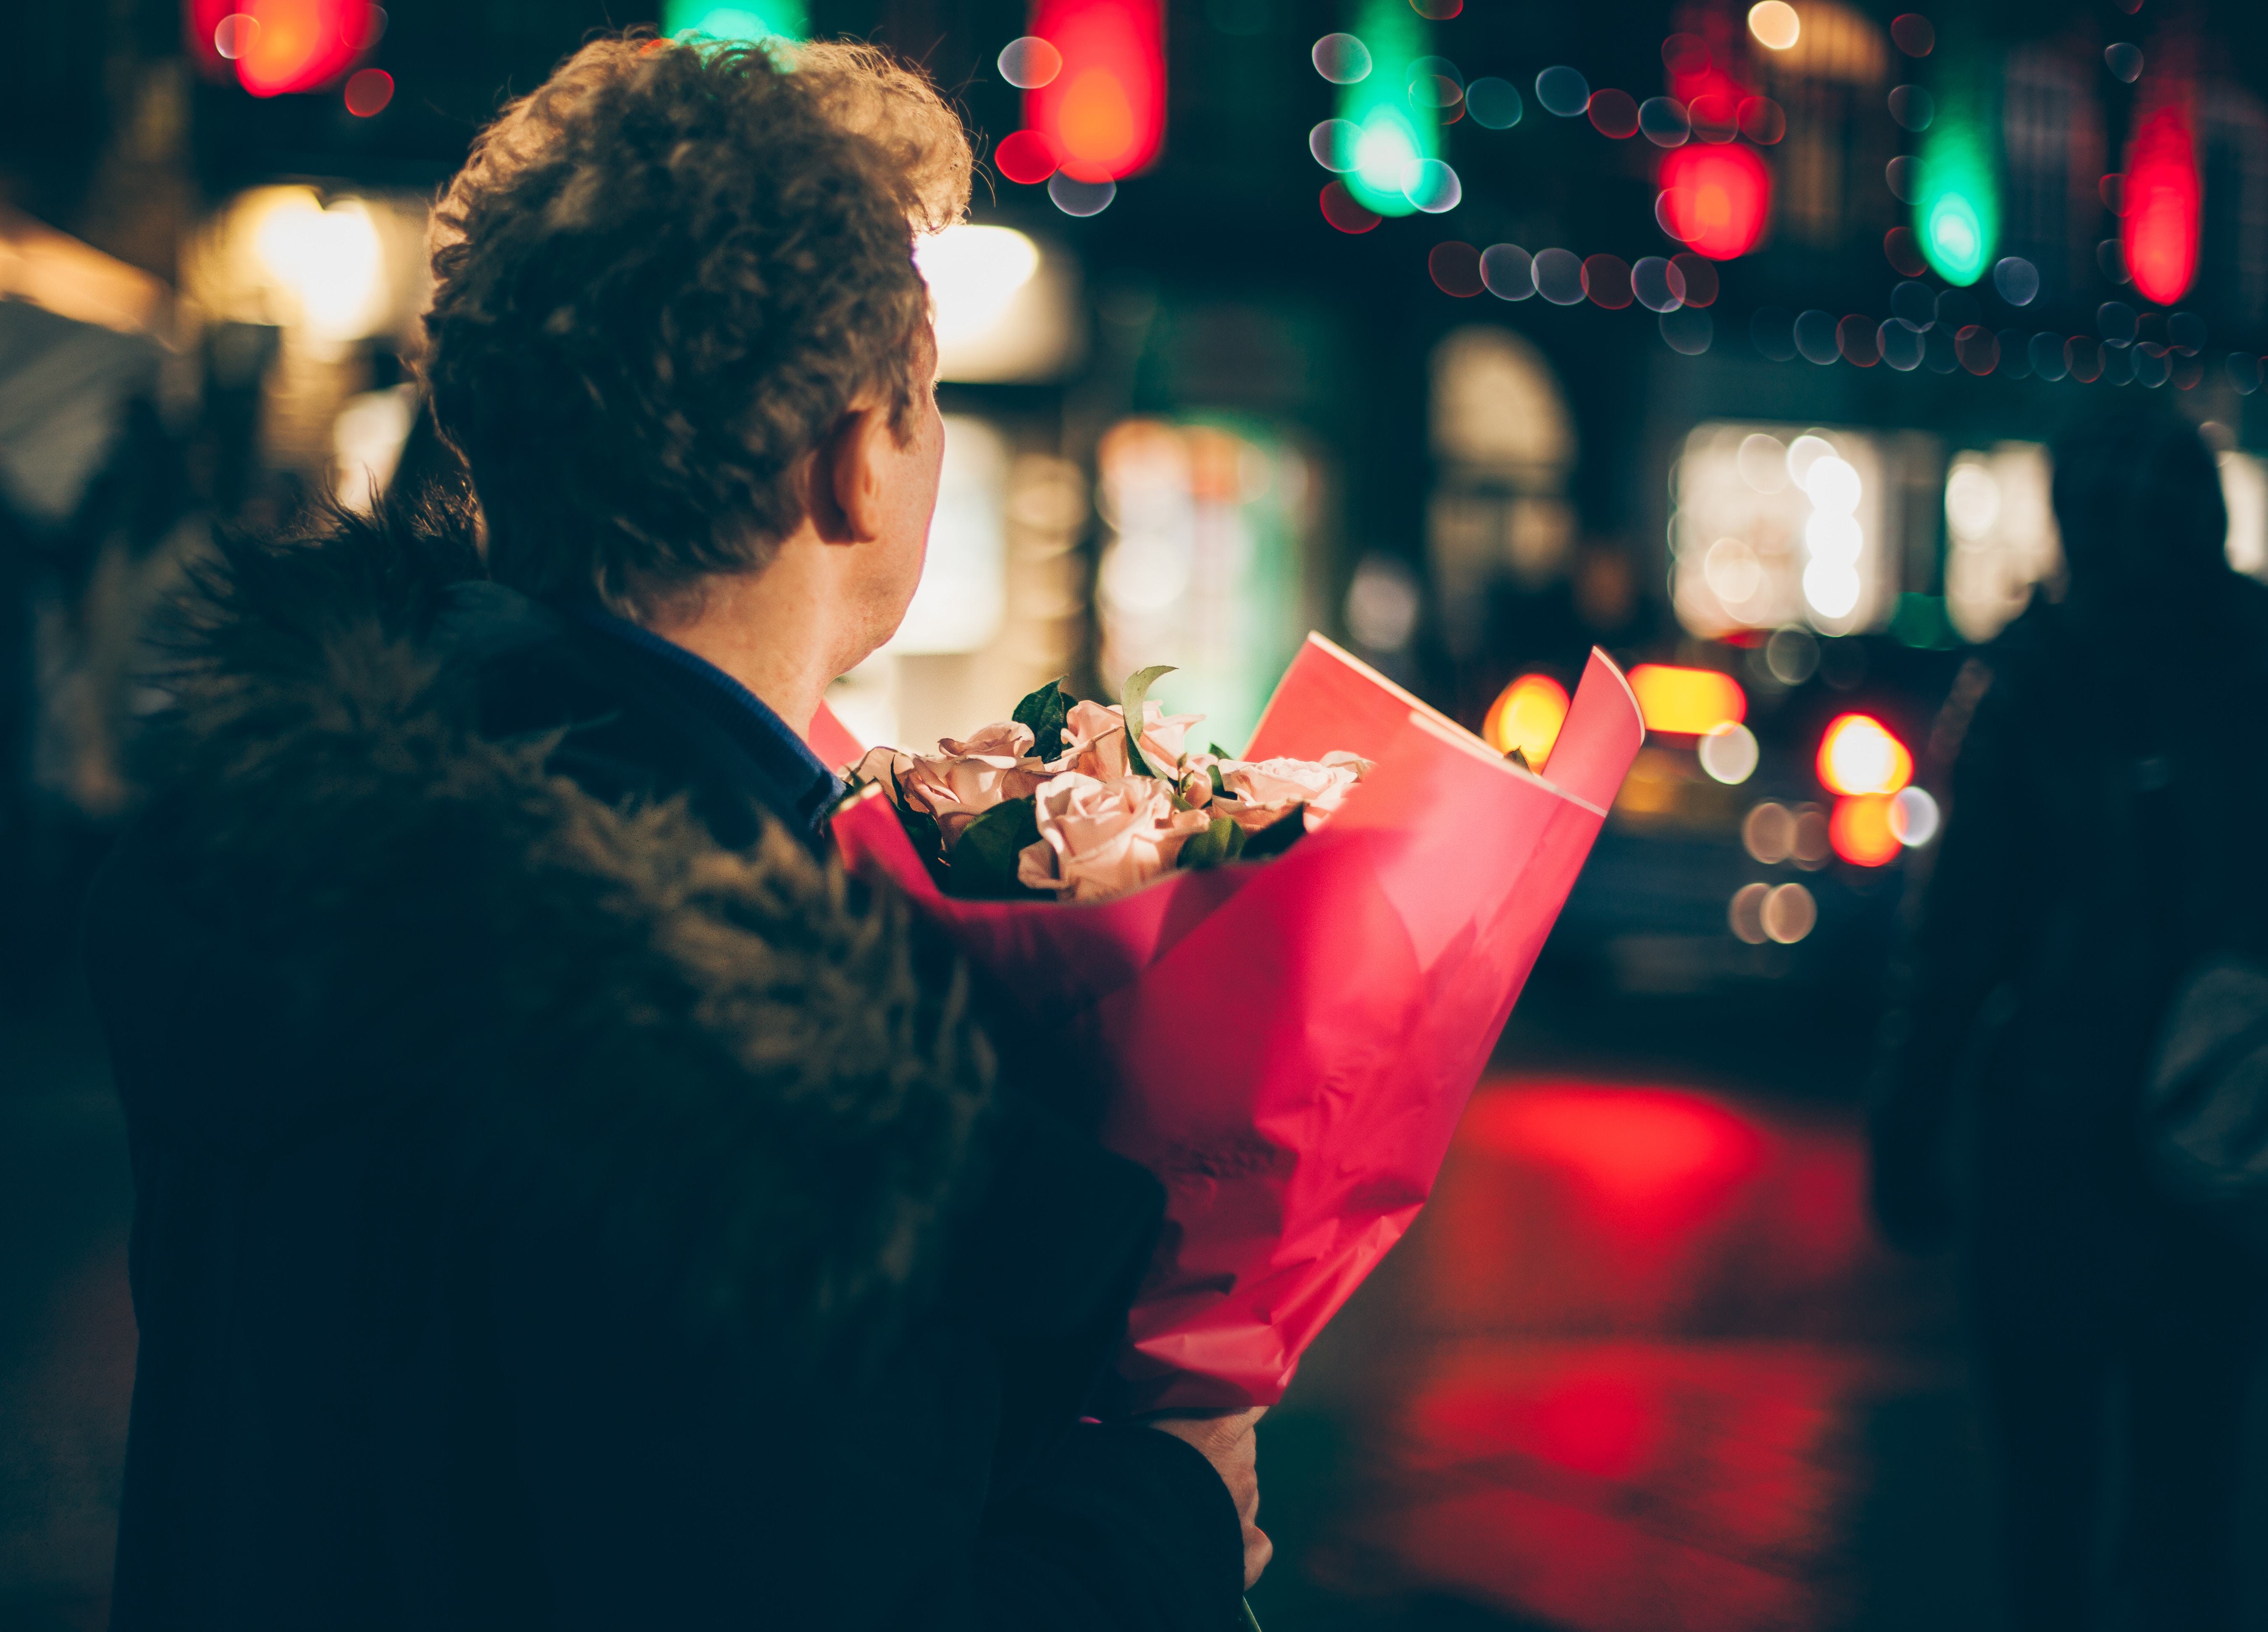 Valentine's Gift To A Sick Loved One. Photo by Clem Onojeghuo on Unsplash.